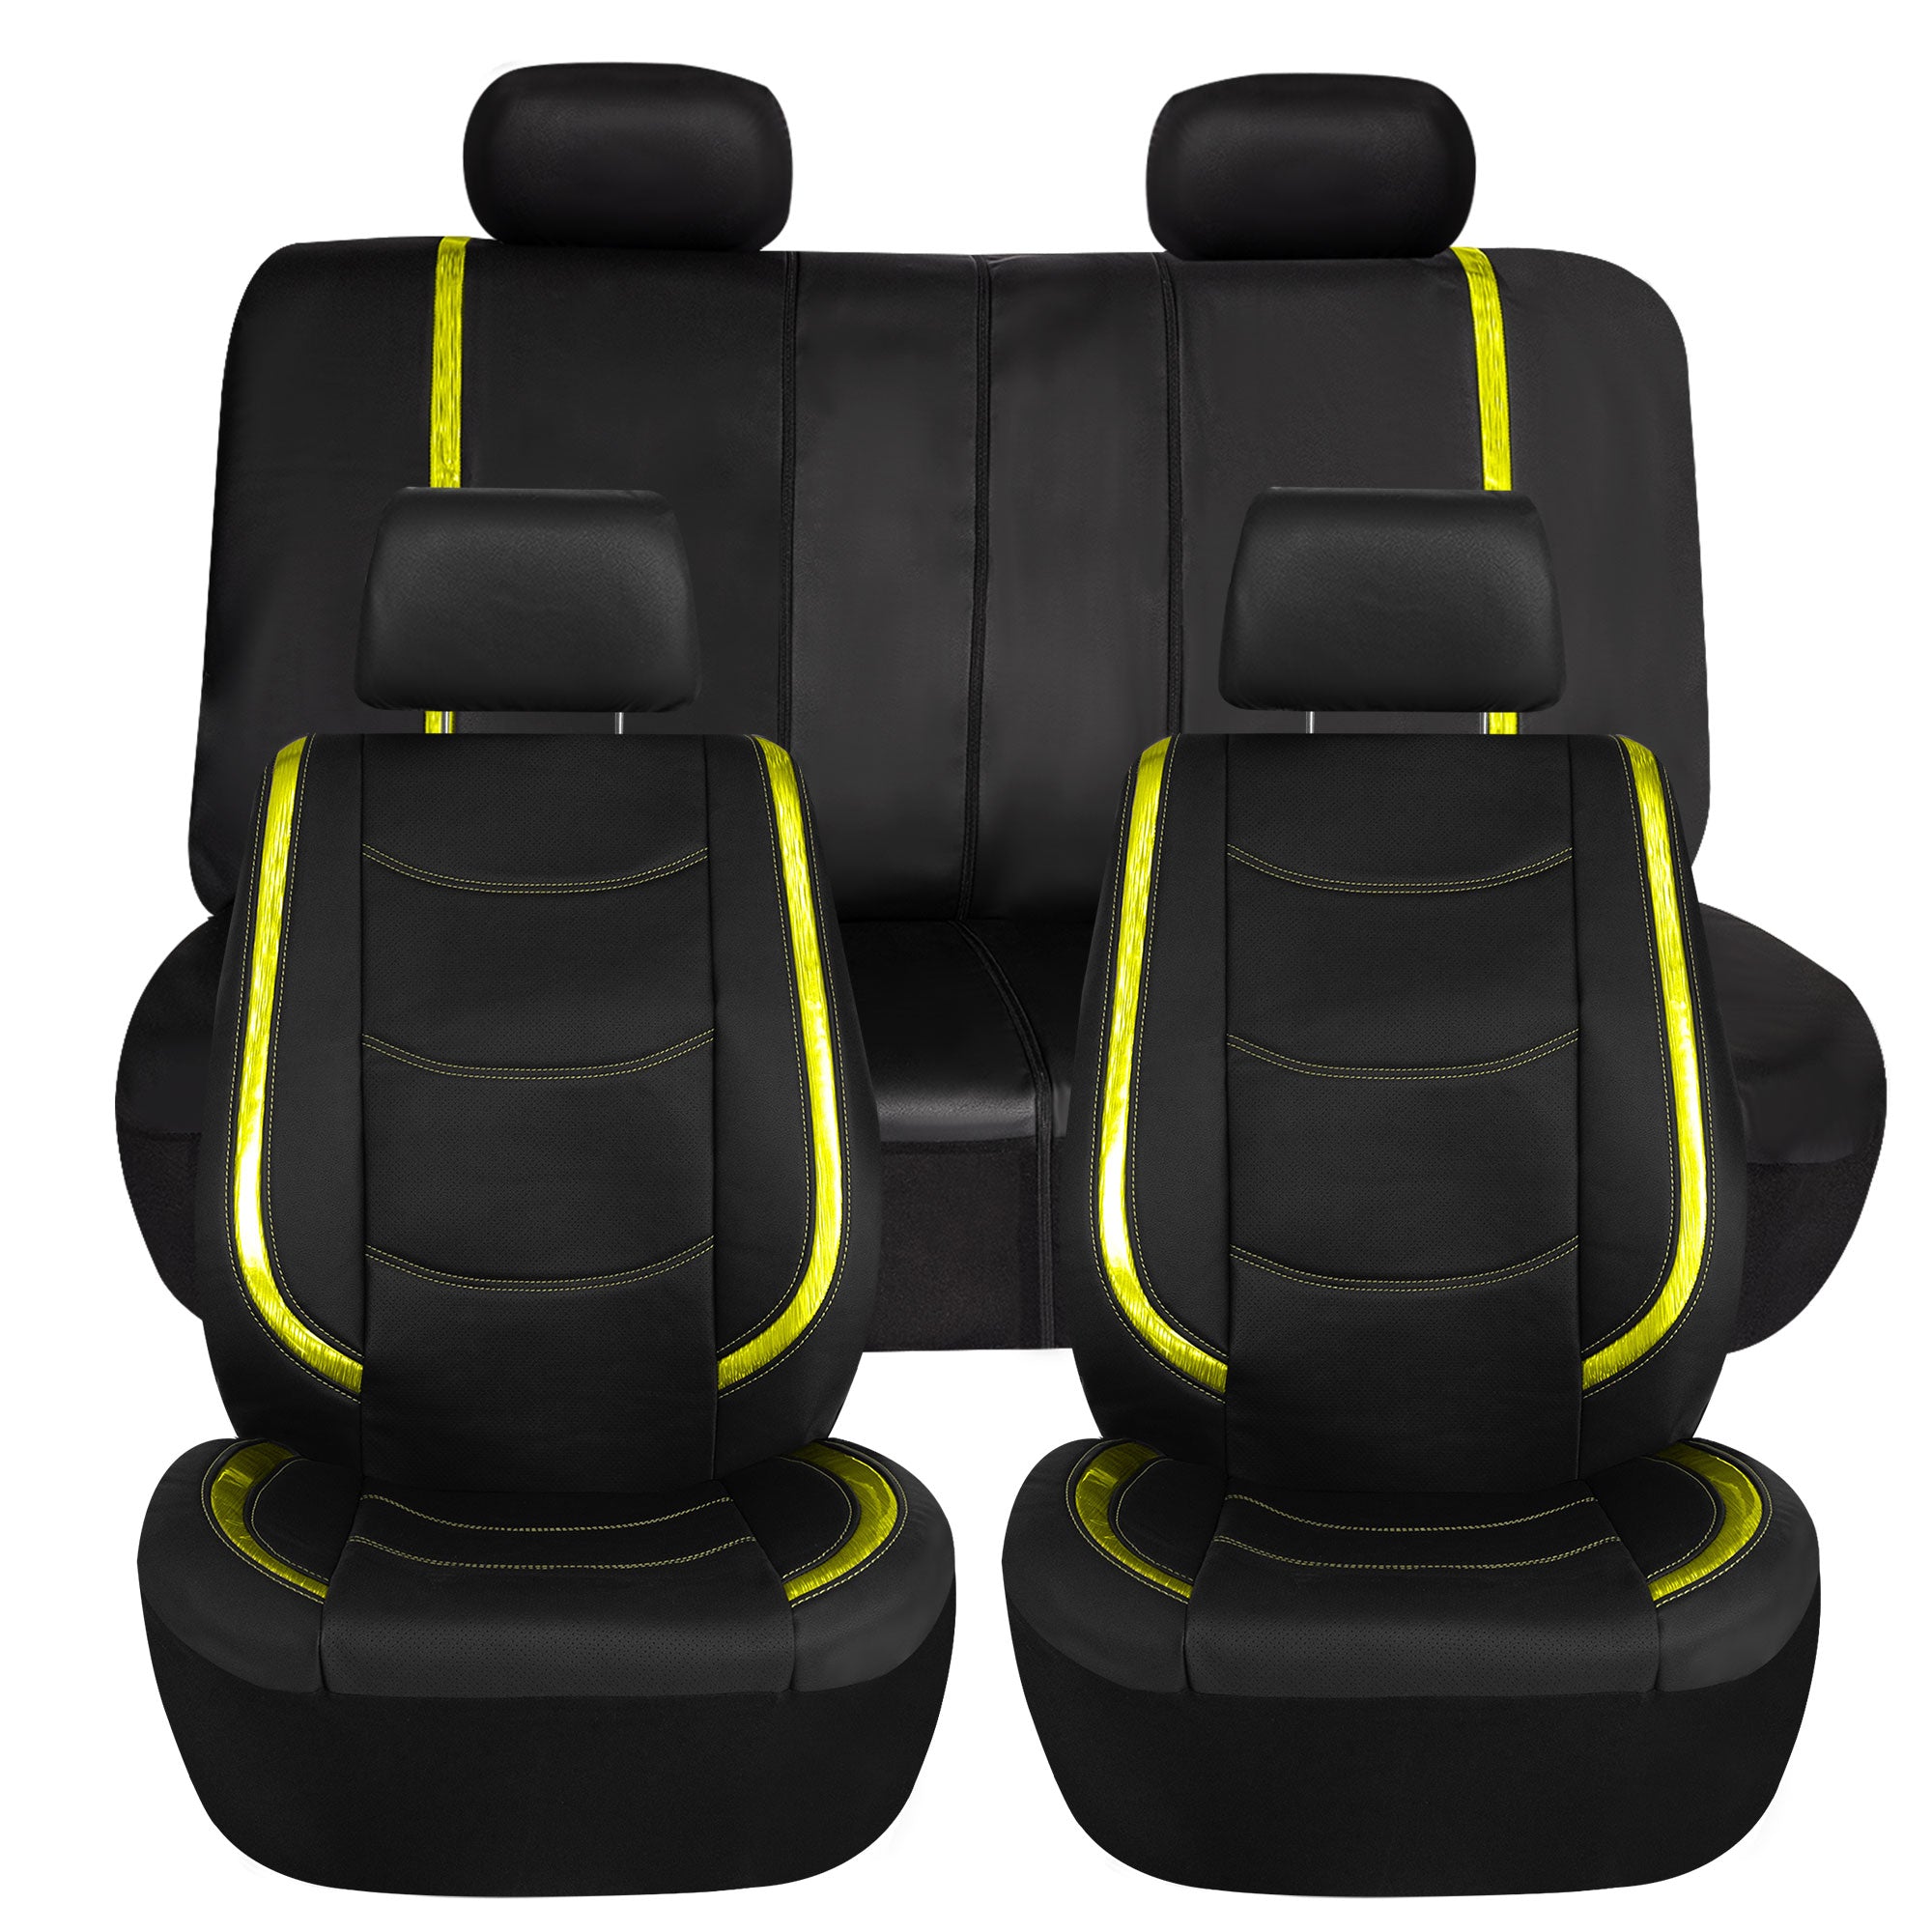 Galaxy13 Metallic Striped Deluxe Leatherette Seat Covers - Full Set Yellow